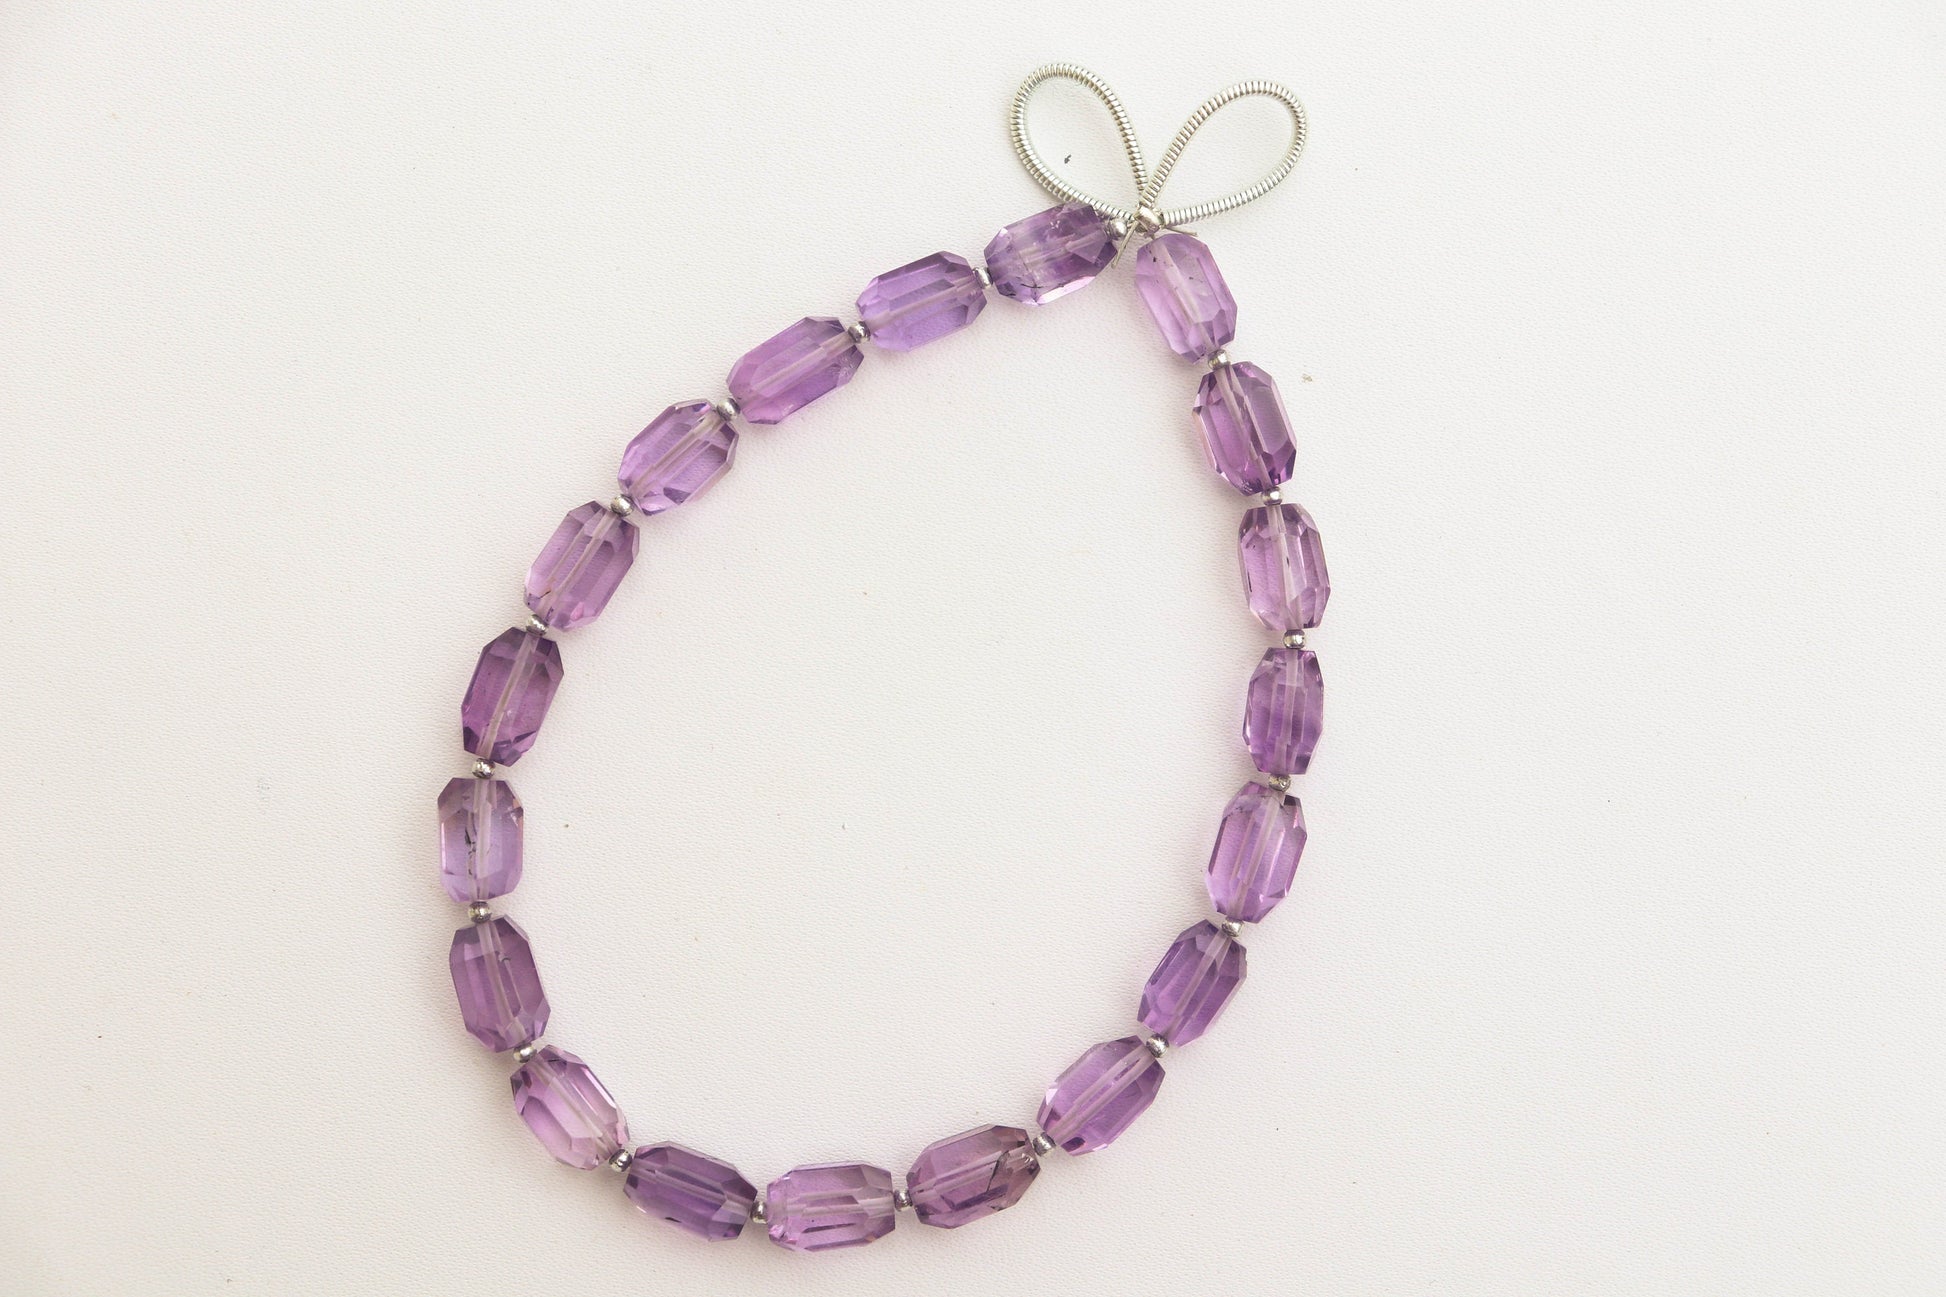 AMETHYST beads uneven faceted tube shape, Amethyst Faceted Beads, Amethyst briolette, Amethyst Drops, Amethyst Gemstone beads AAA+ Beadsforyourjewelry